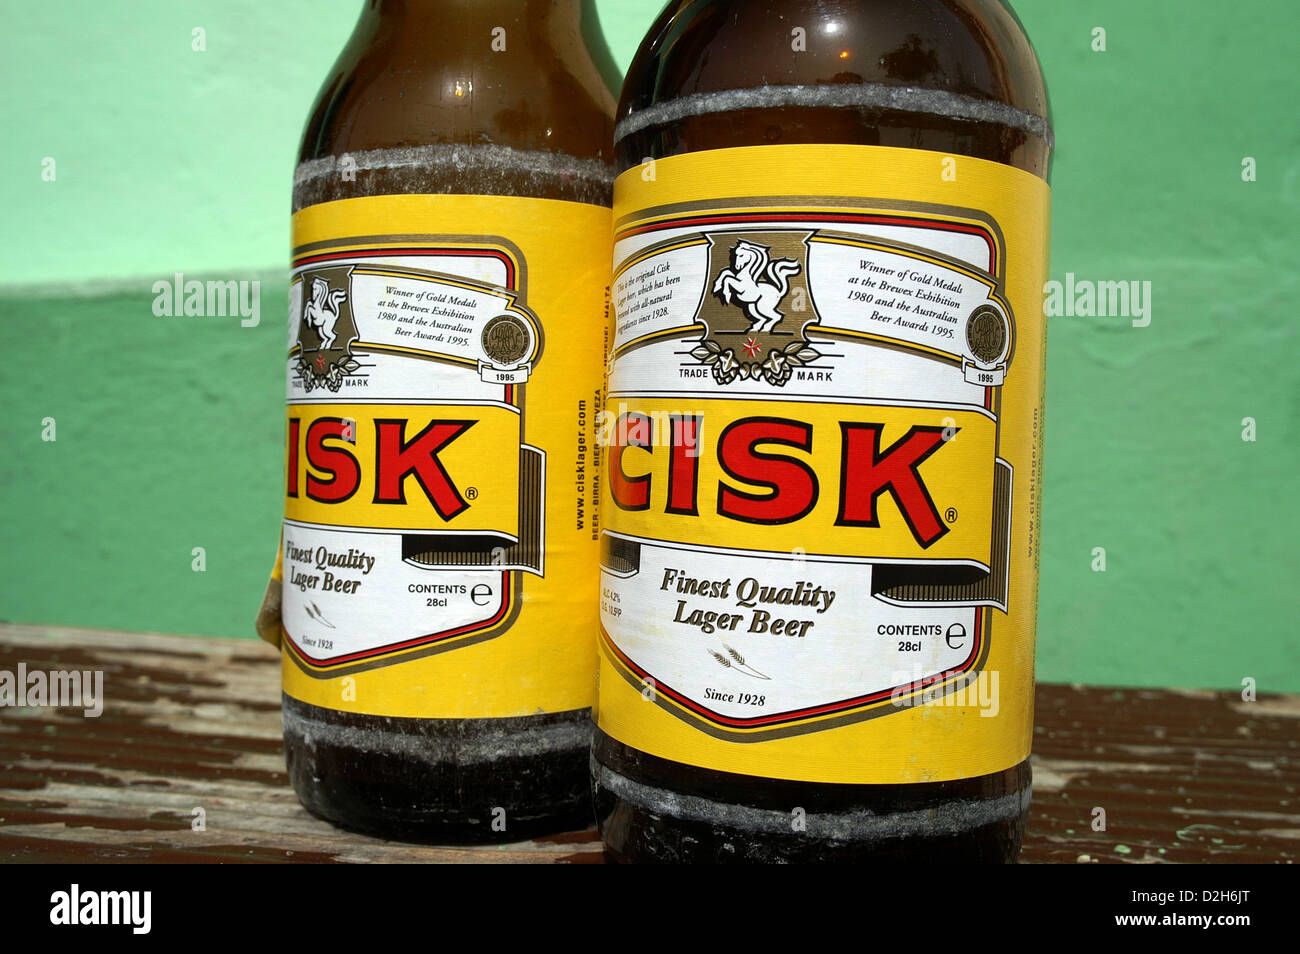 Malta, Cisk, the beer of Malta, and very nice too!. Brewed in Malta since 1928. Stock Photo